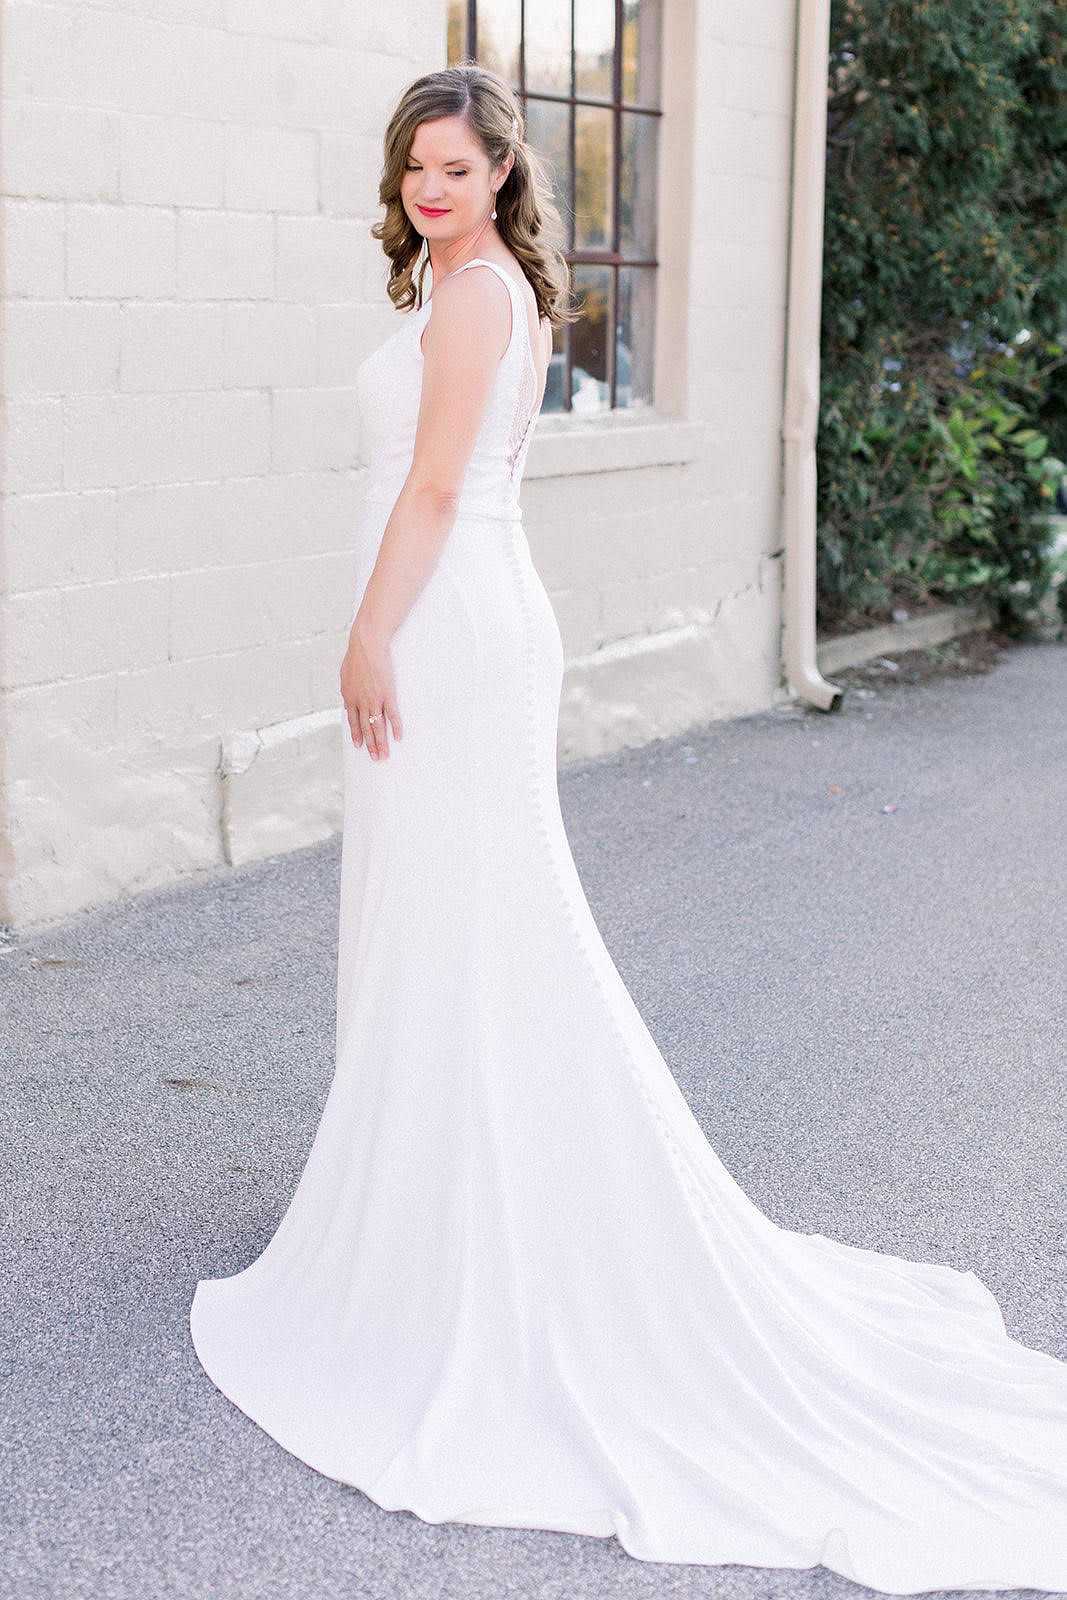 Bride in a white wedding dress with a long train, standing outside near a brick wall and window.